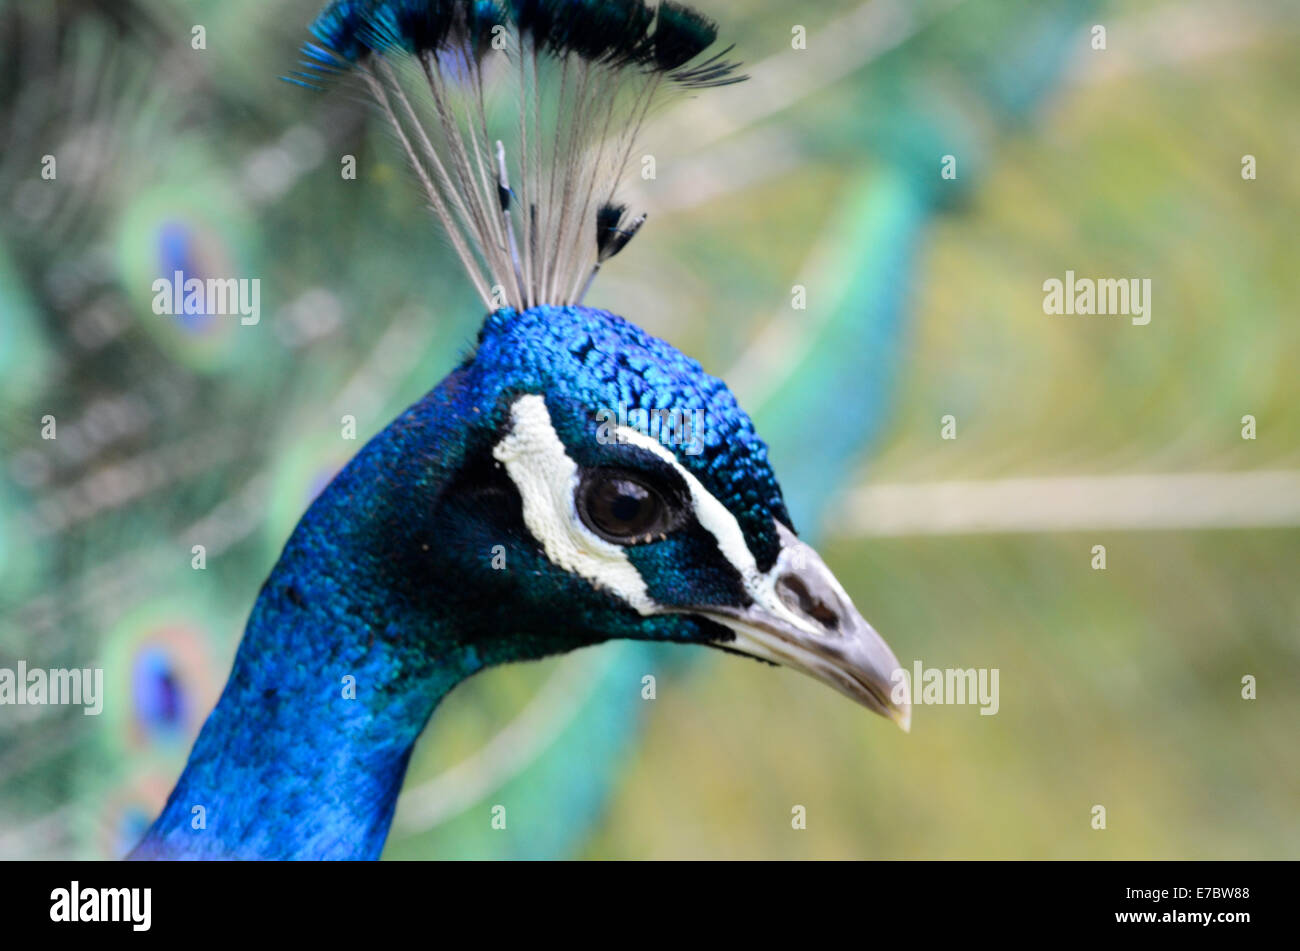 Close up of a peacock, showing its interesting facial markings Stock Photo